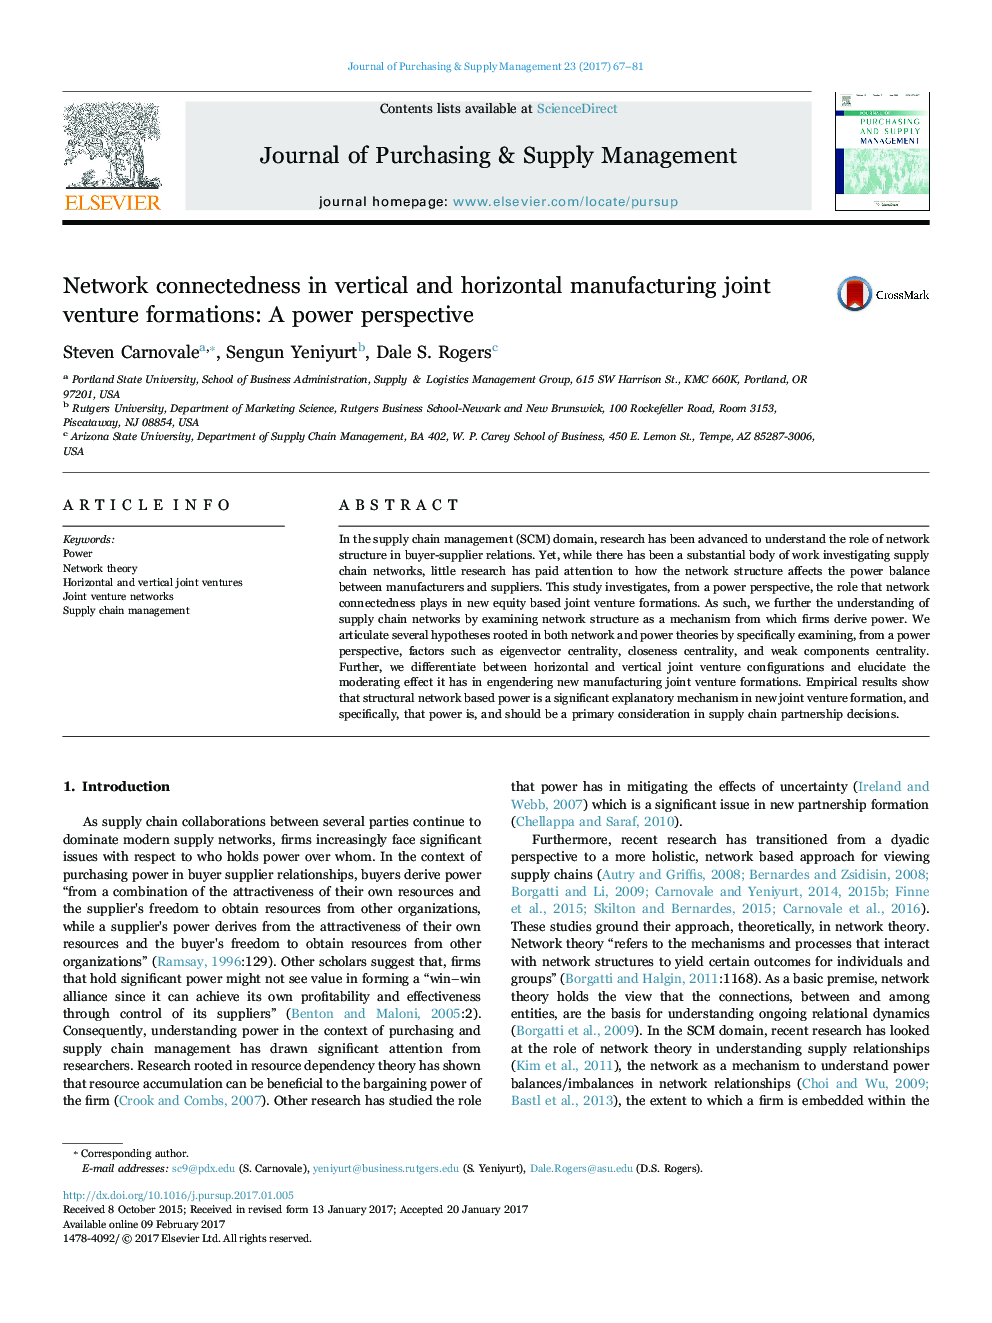 Network connectedness in vertical and horizontal manufacturing joint venture formations: A power perspective